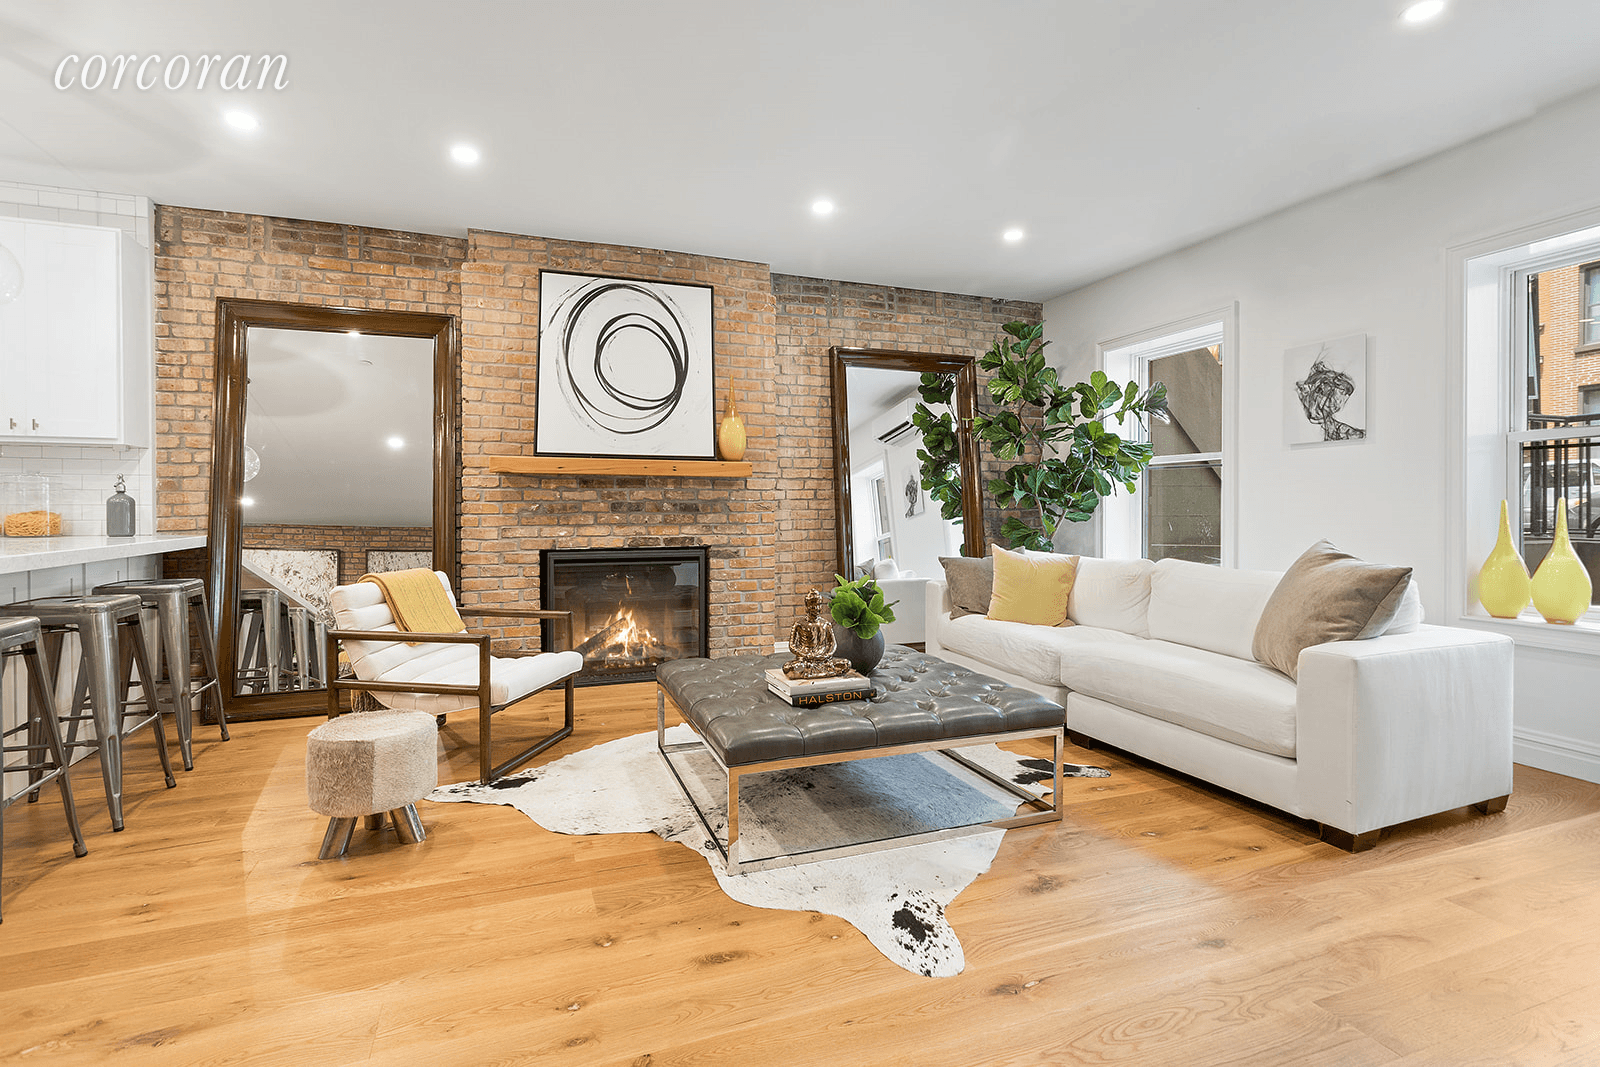 Welcome home to 154 Nelson Street, this thoughtfully designed and meticulously finished garden duplex is set on a quiet, well preserved block in the heart of Carroll Gardens.